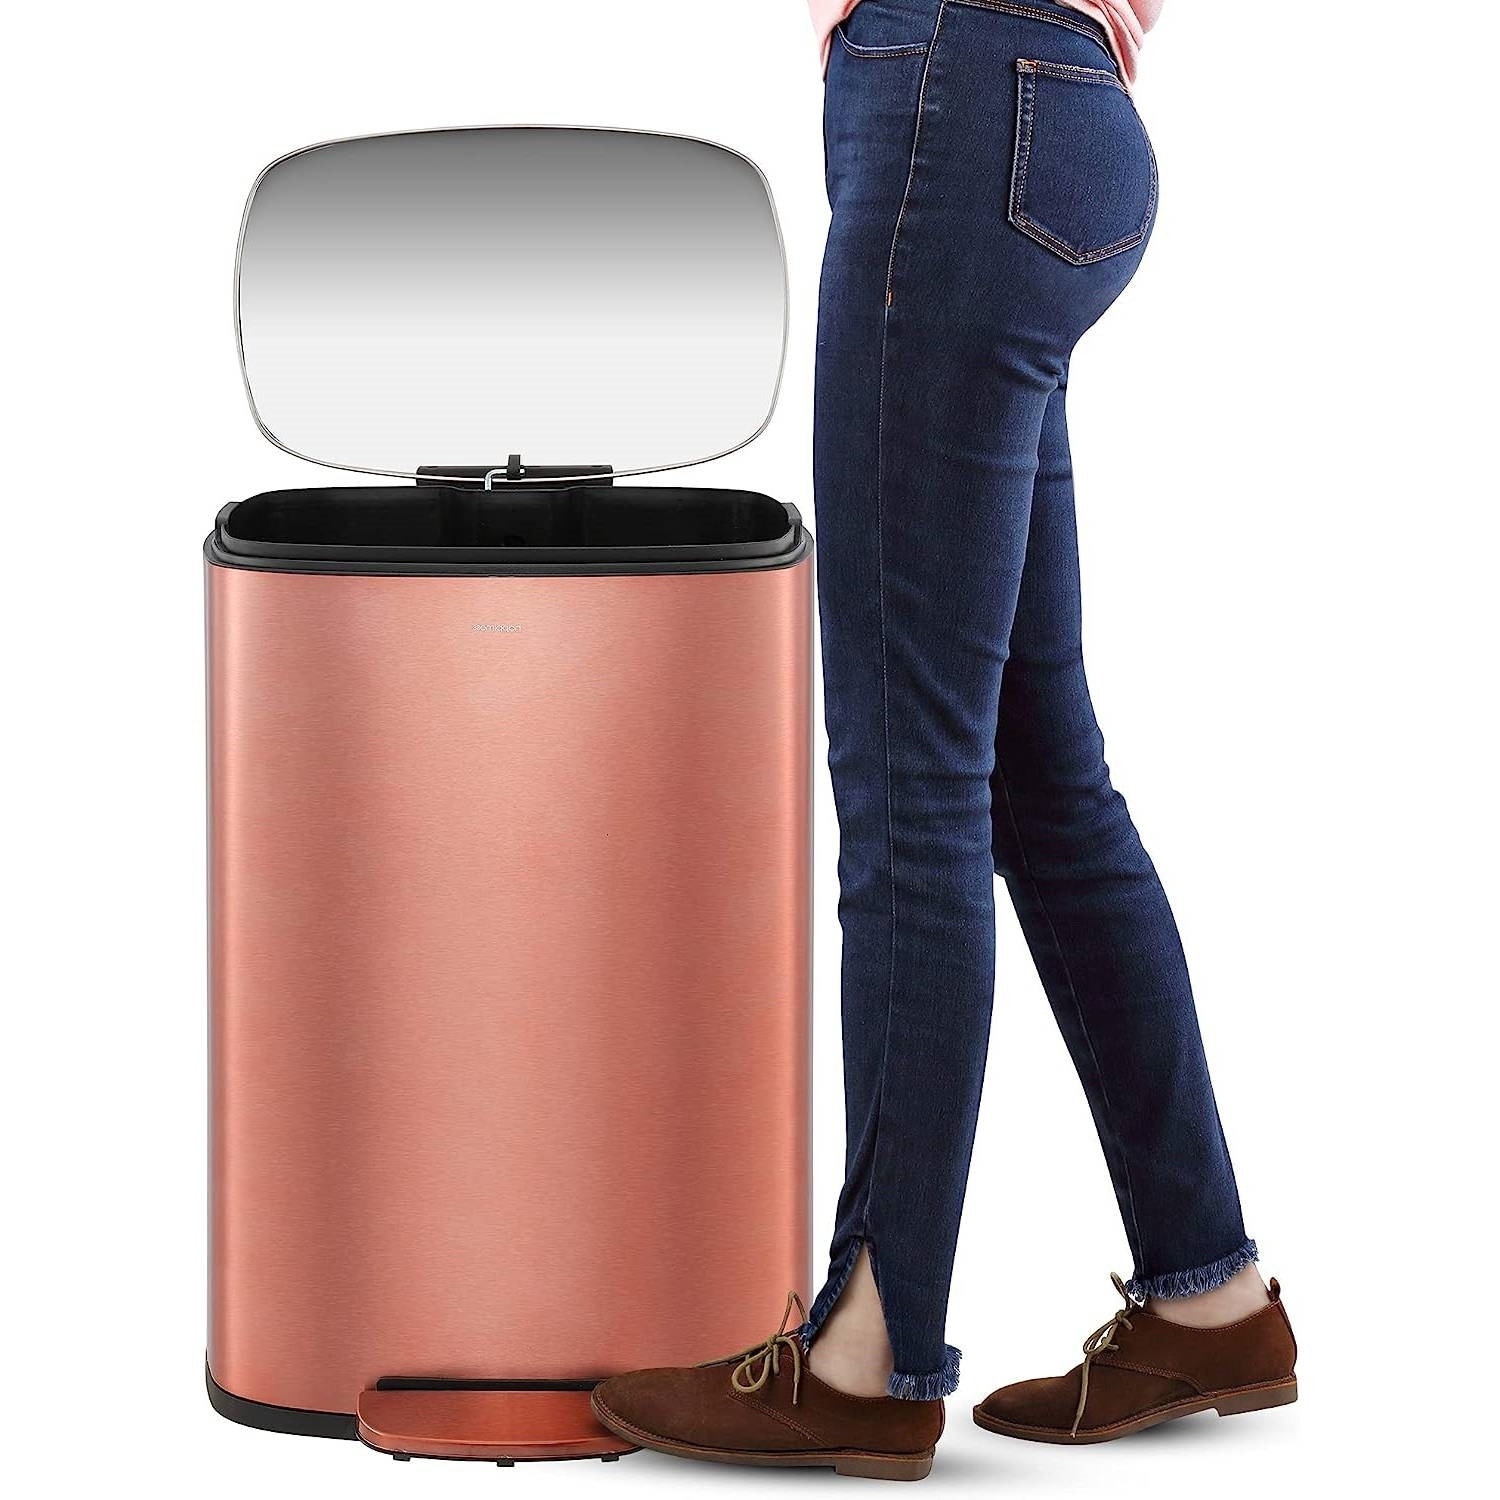 https://ak1.ostkcdn.com/images/products/is/images/direct/ce9280fdec419b4d94211458567f916dab78ac3e/Set-of-2---Copper-Gold-Step-on-Trash-Can---13-Gallon-and-1.3-Gallon.jpg